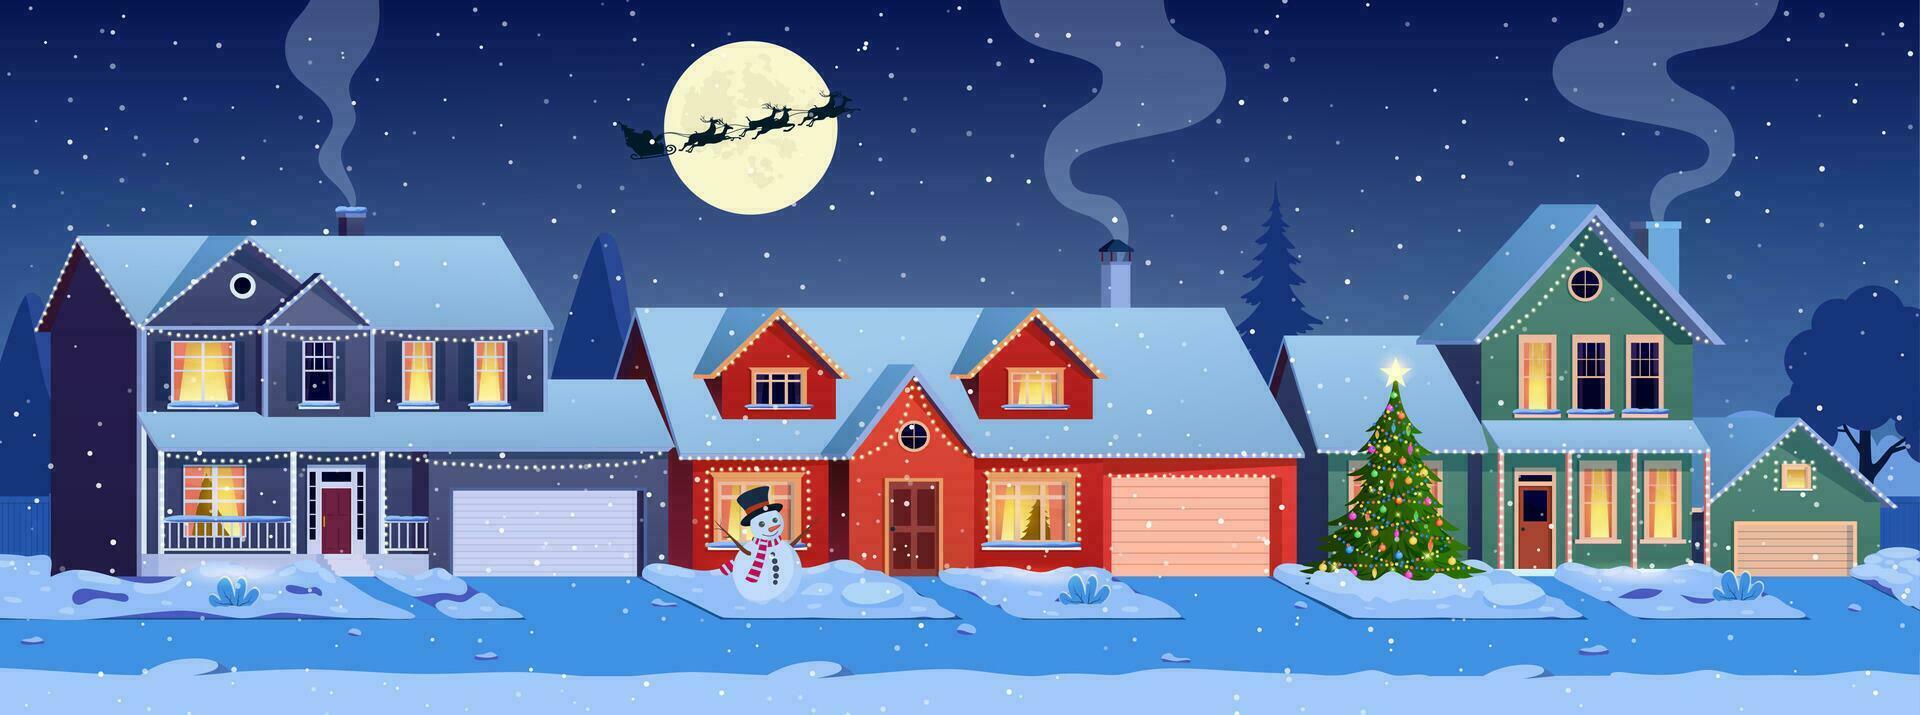 Residential houses with christmas decoration at night. cartoon winter landscape street with snow on roofs and garlands, christmas tree, snowman. Santa Claus with deers in sky. Vector illustration